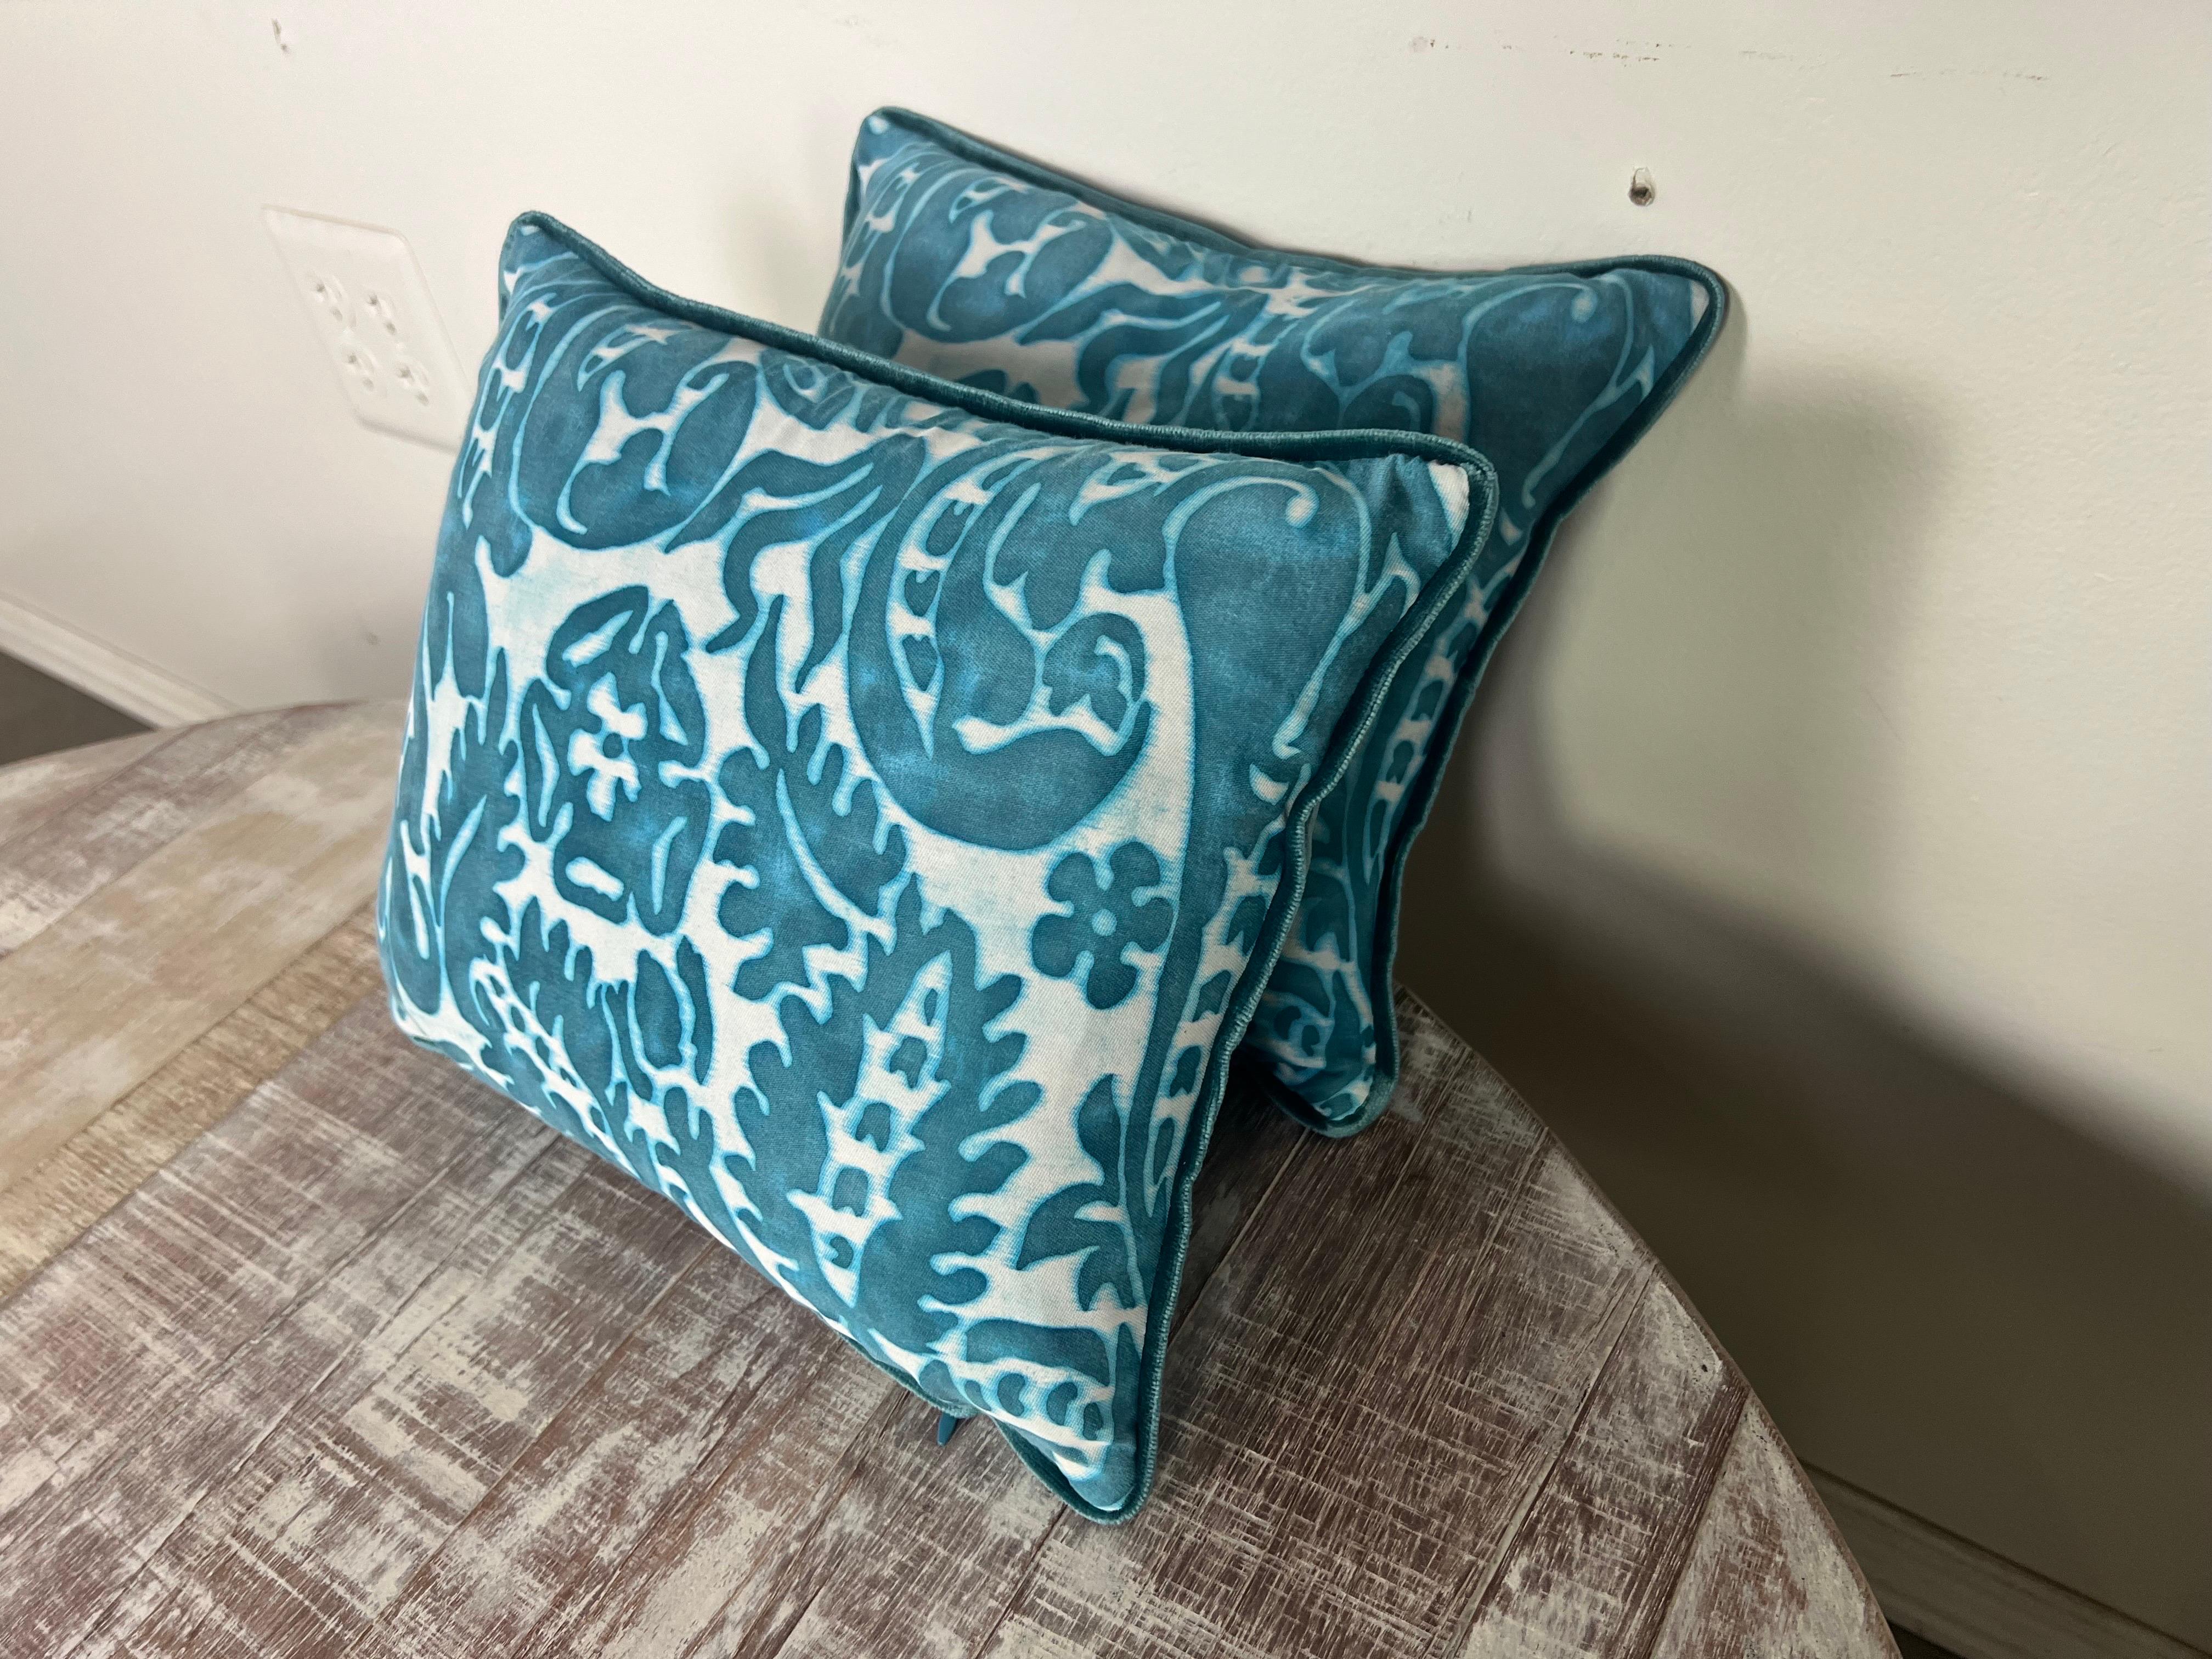 Italian Pair of Teal and White Colored Fortuny Style Pillows For Sale